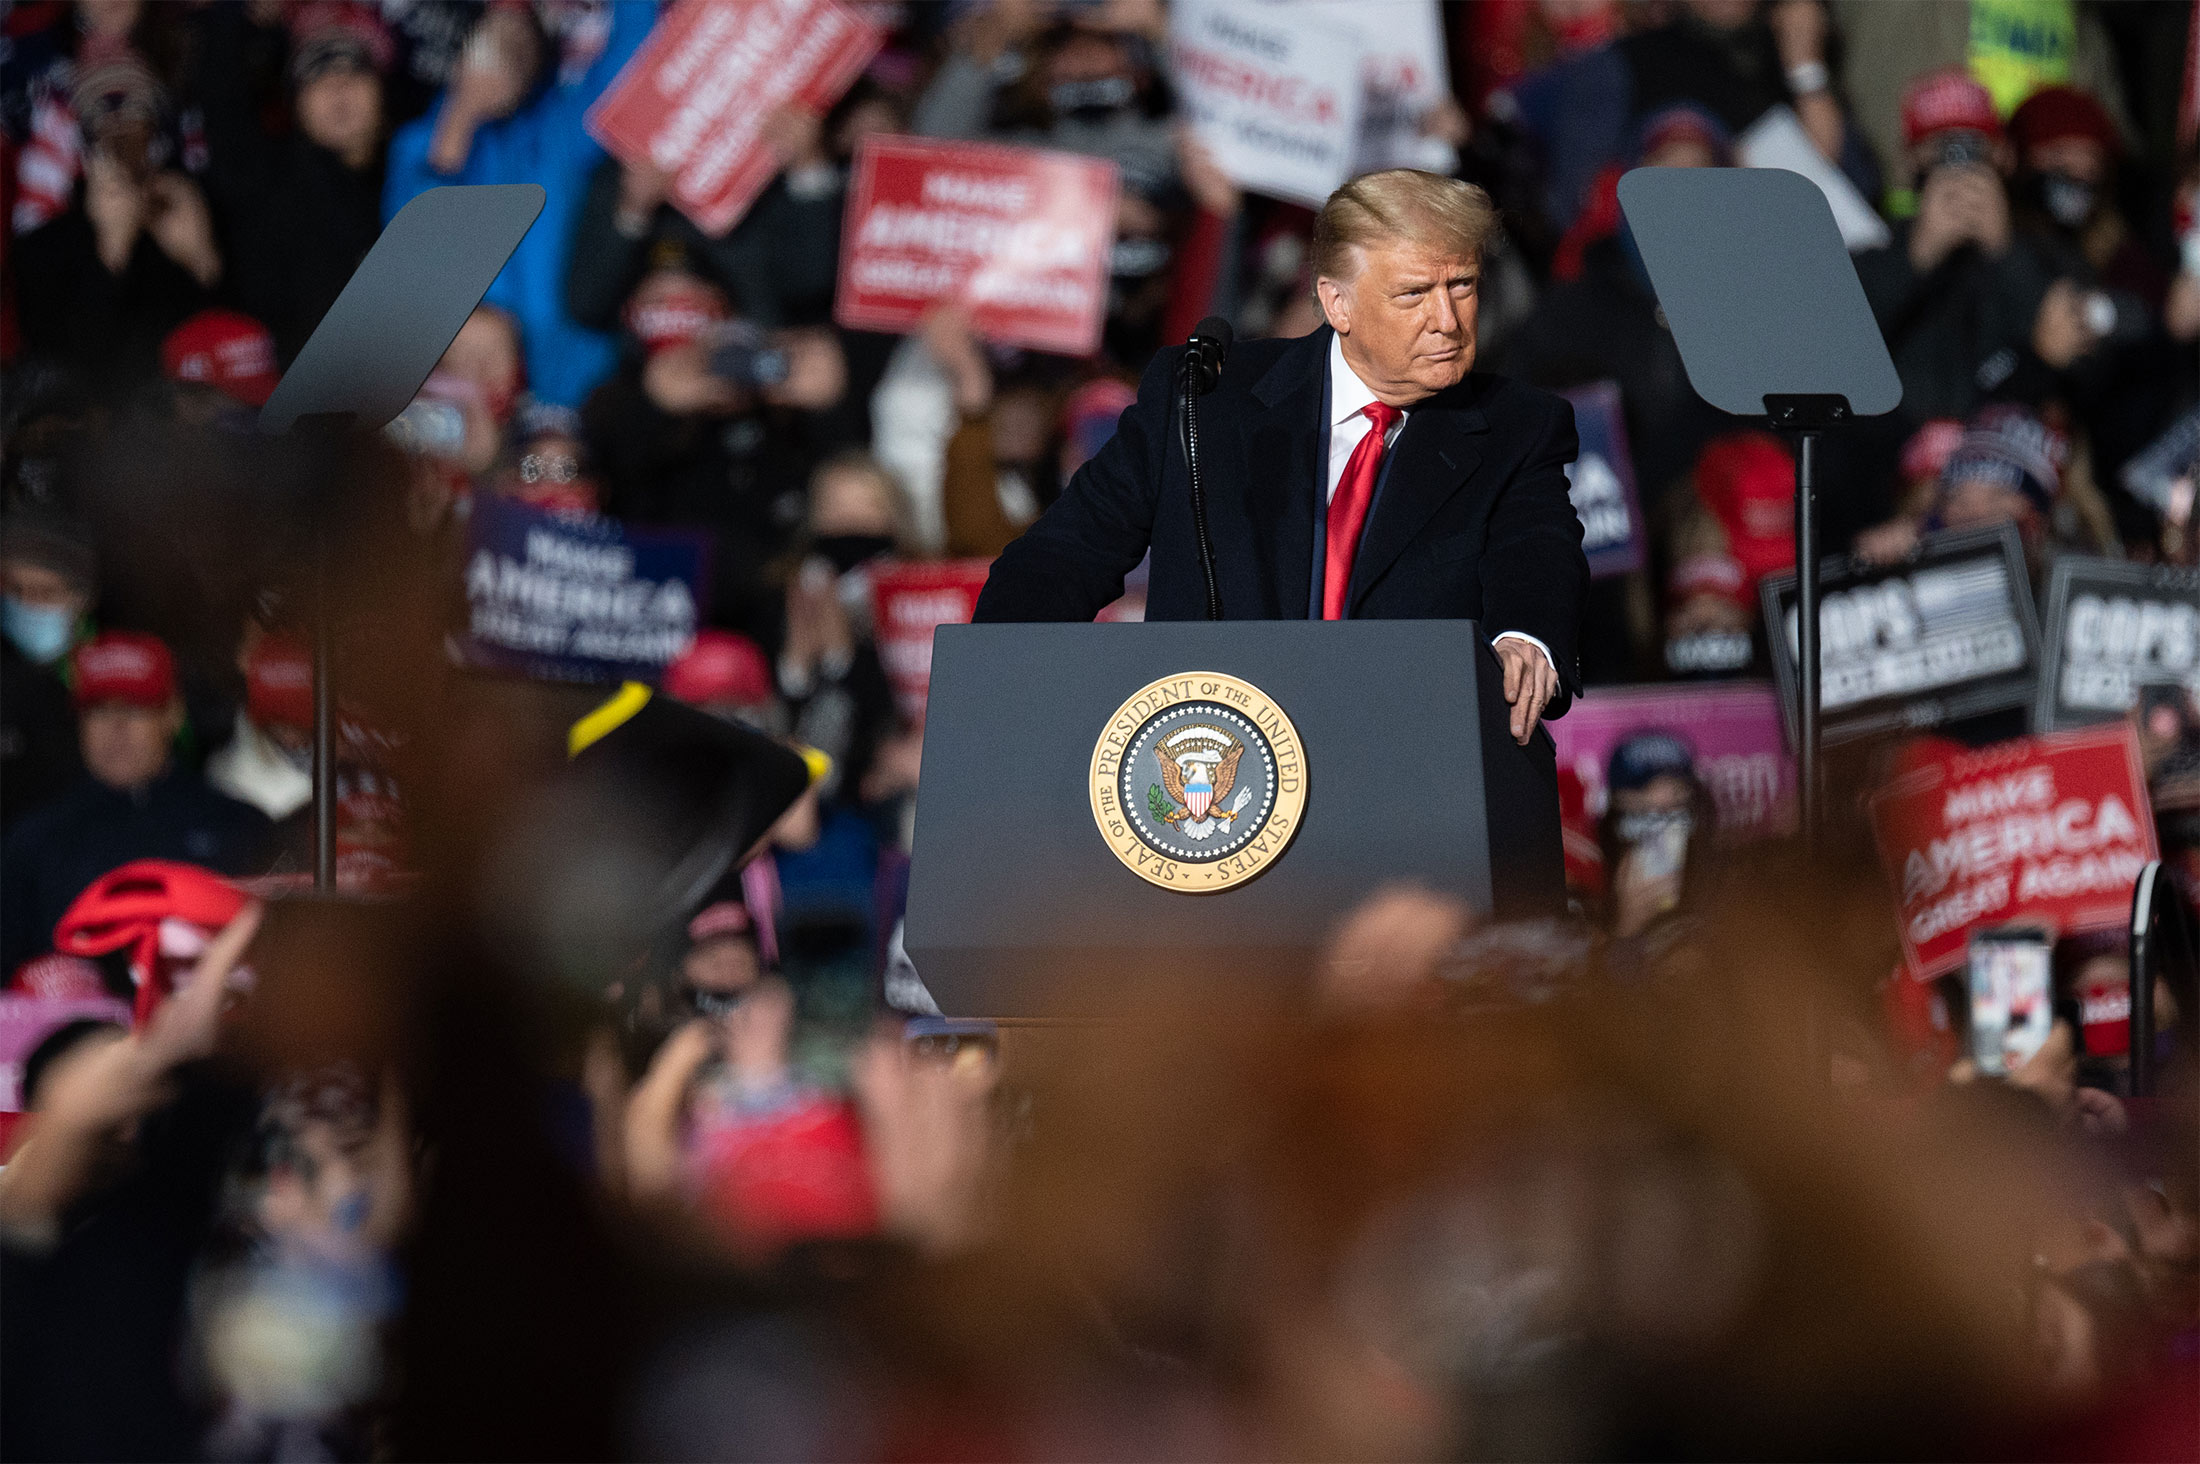 Trump spoke to his audience in Erie on Tuesday, saying ”You have to watch what we do to ‘60 Minutes,’” and added&nbsp;&quot;Lesley Stahl’s not going to be happy.”